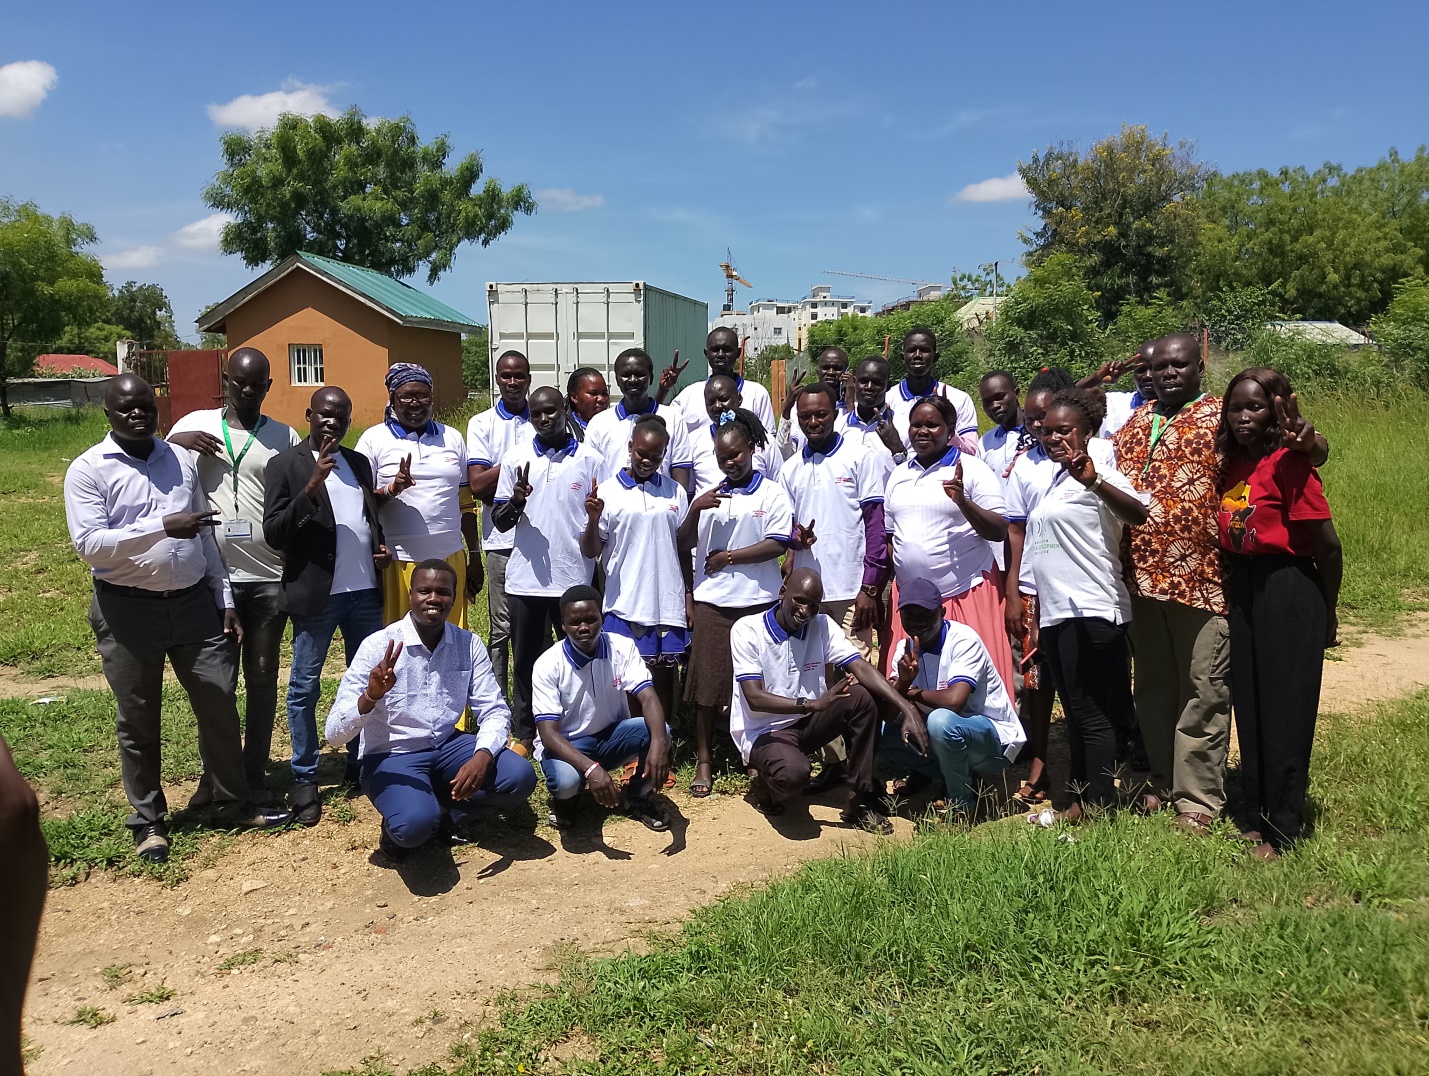 Juba teachers trained in conflict resolution